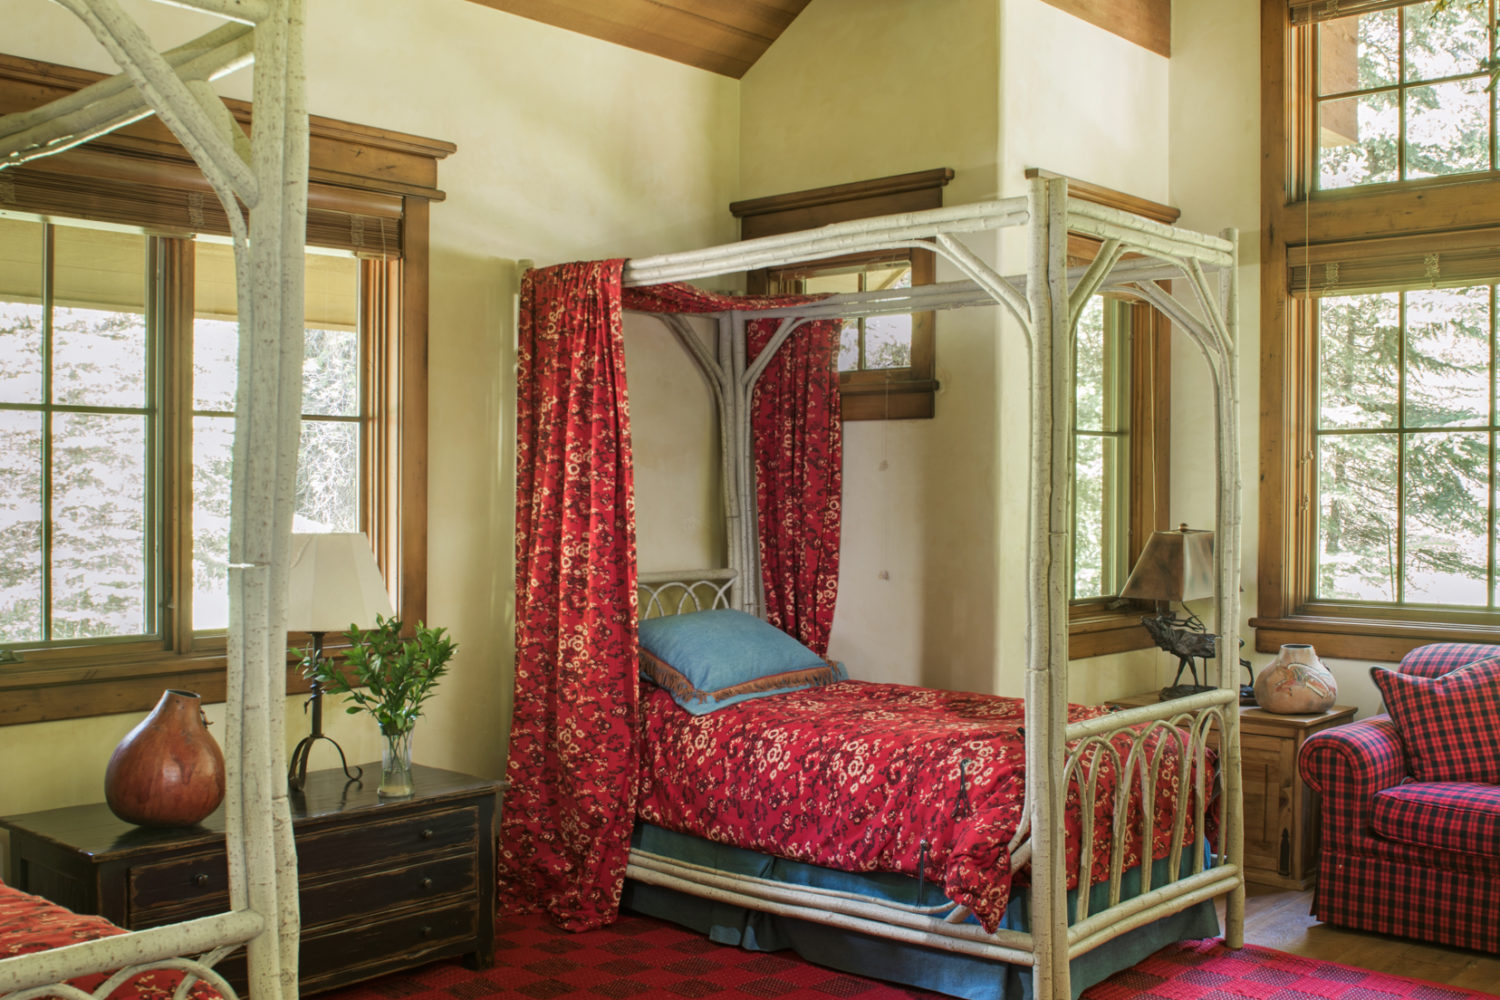 A western-themed bedroom with two twin beds